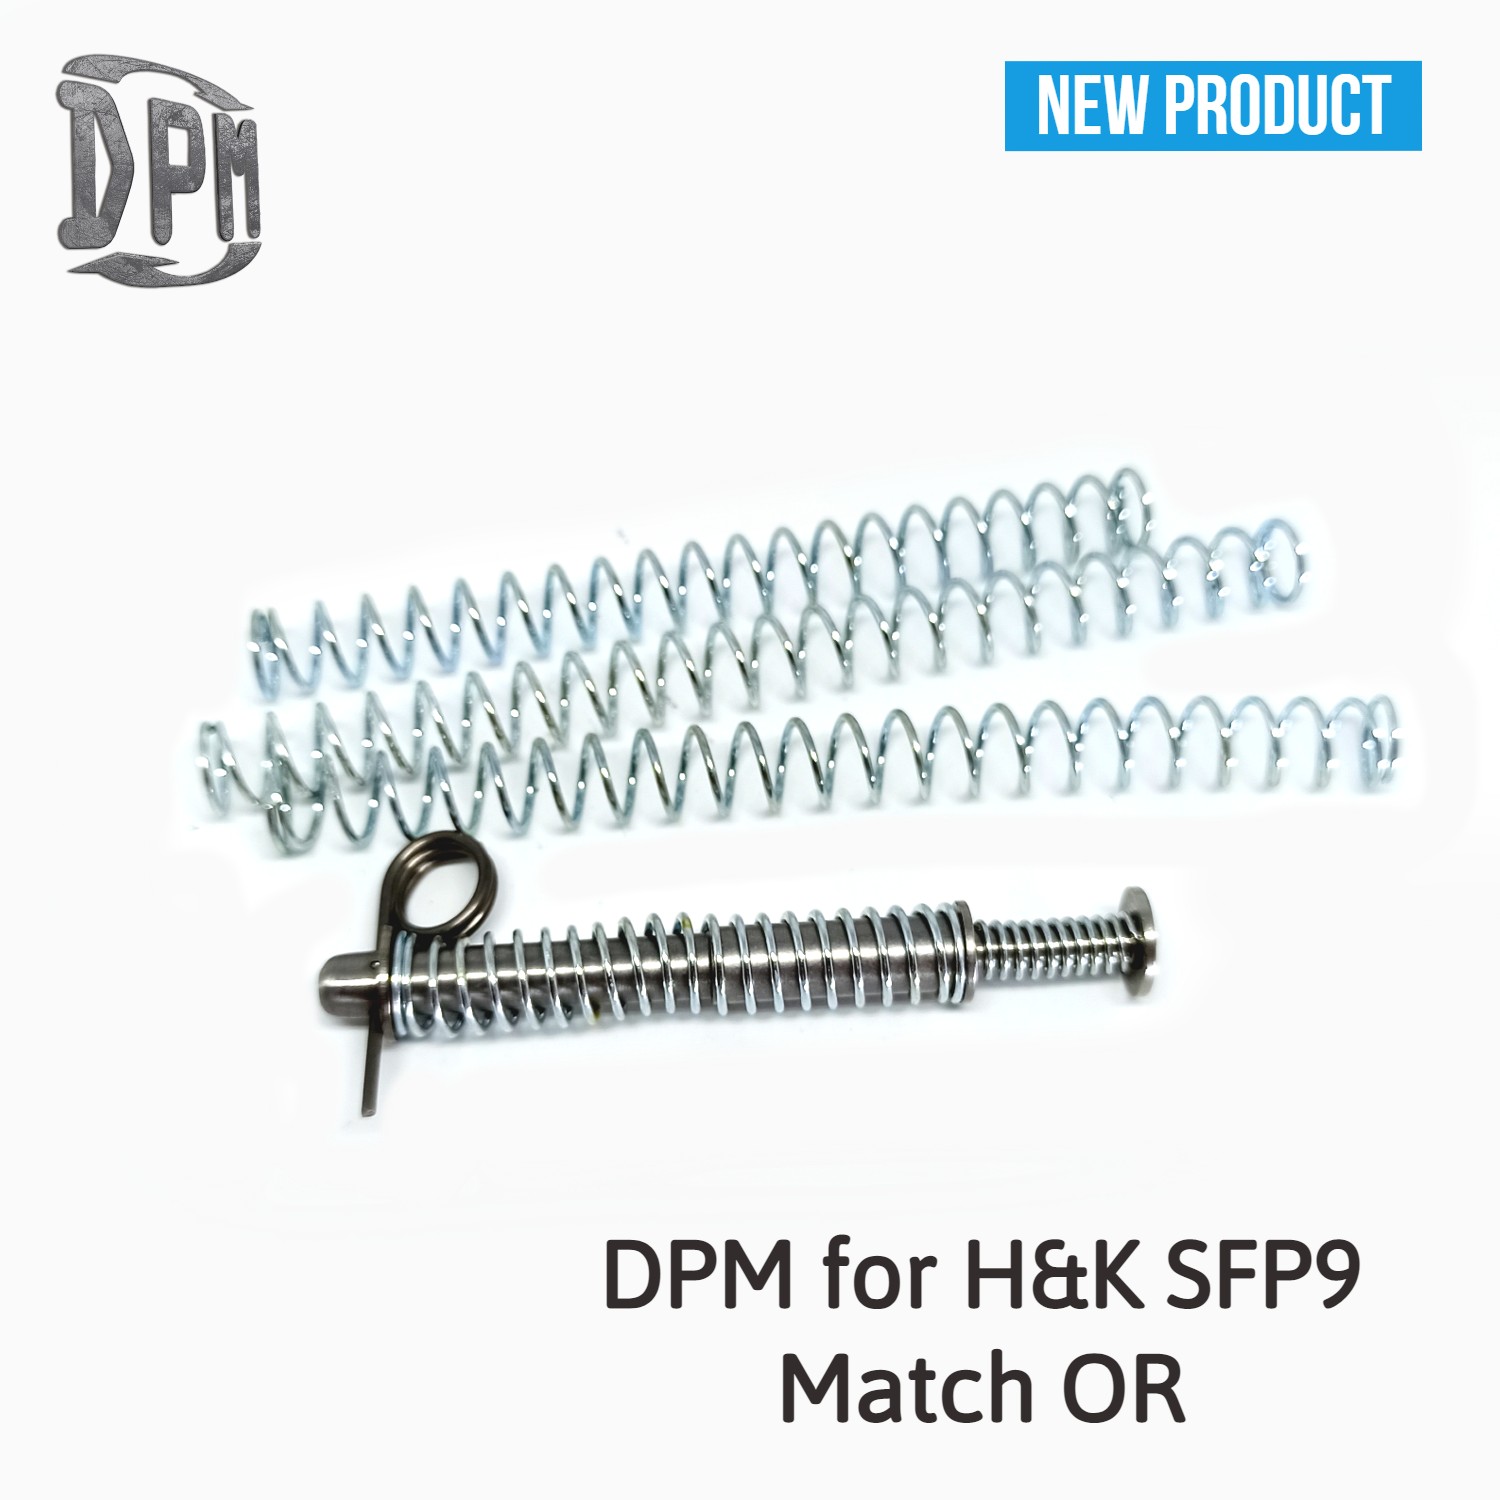 DPM-for-HK-SFP9-Match-OR